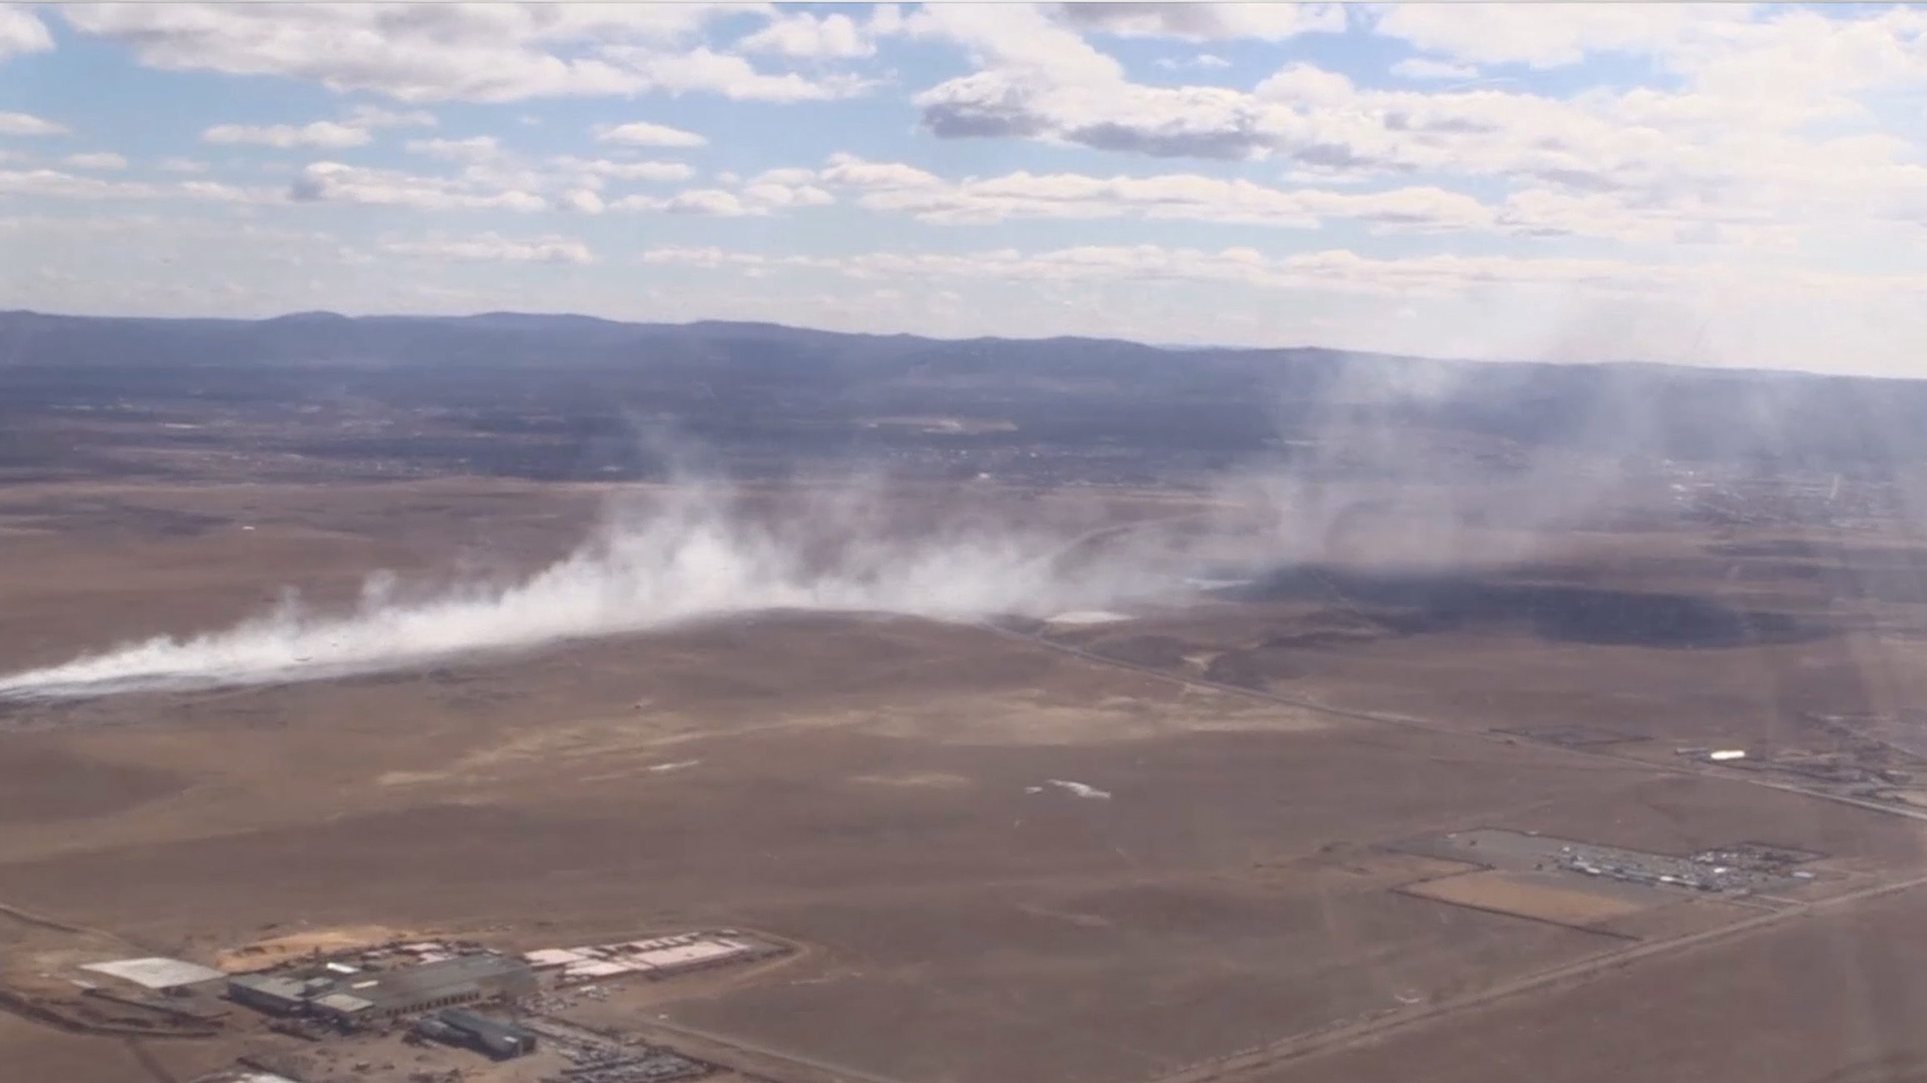 epa04707227 A still image from an undated handout video released 16 April 2015 by the Russian Emergency Ministry press service shows aerial view of smoke rising from a wildfire taken from onboard a Be-200 multipurpose  amphibious aircraft in flight over the Chita region, Transbaikal territory, southeastern Siberia, Russia. Over 6,700 people and 1,500 pieces of equipment are involved in fighting wildfires in Siberia which killed 30 people only in Khakassia.  EPA/RUSSIAN EMERGENCY MINISTRY PRESS SERVICE  HANDOUT EDITORIAL USE ONLY/NO SALES